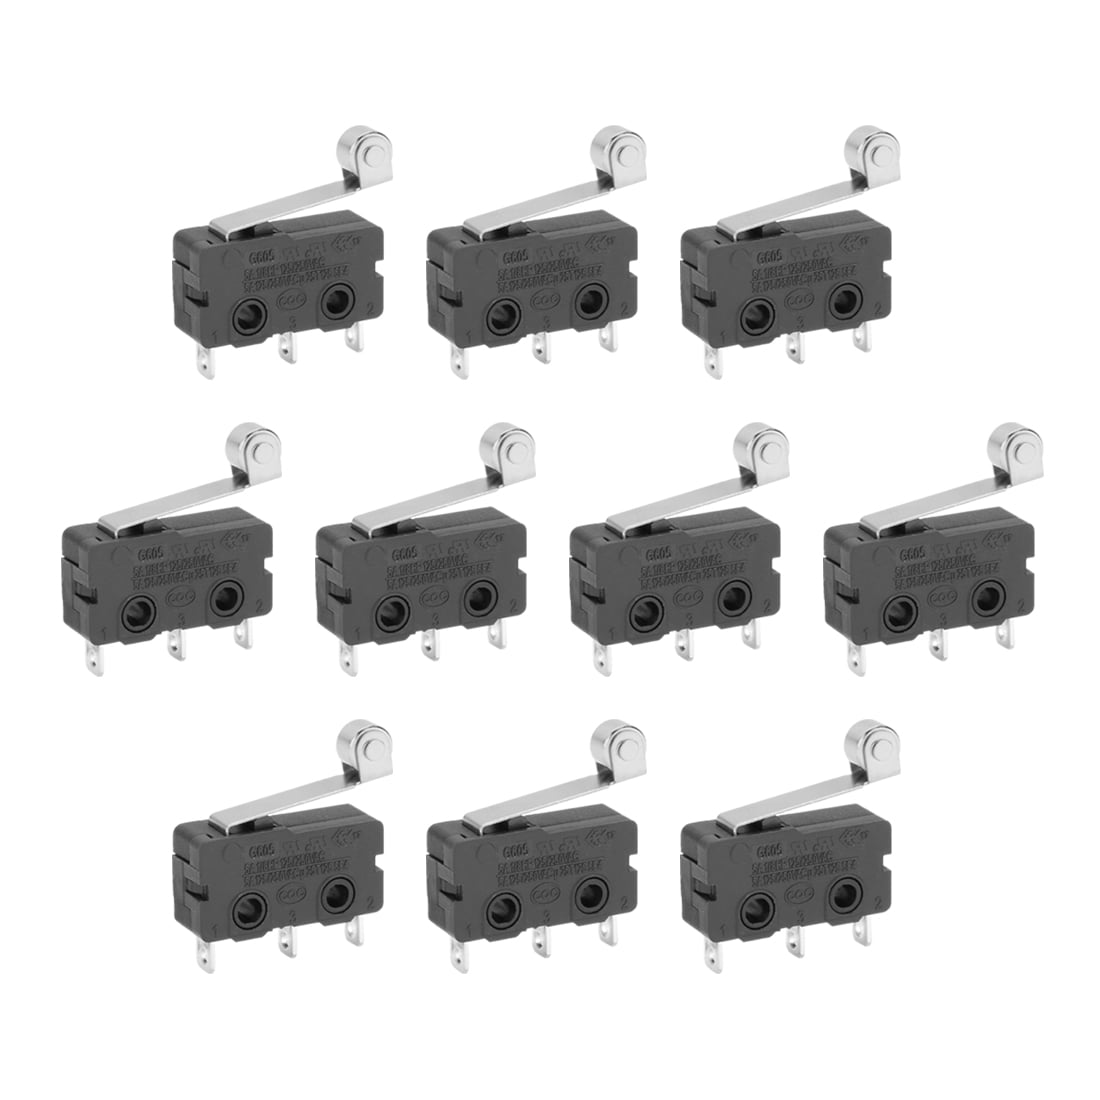 10 PC Temco Micro Limit Switch Roller Arm Subminiature SPDT Snap Action Lot for sale online 